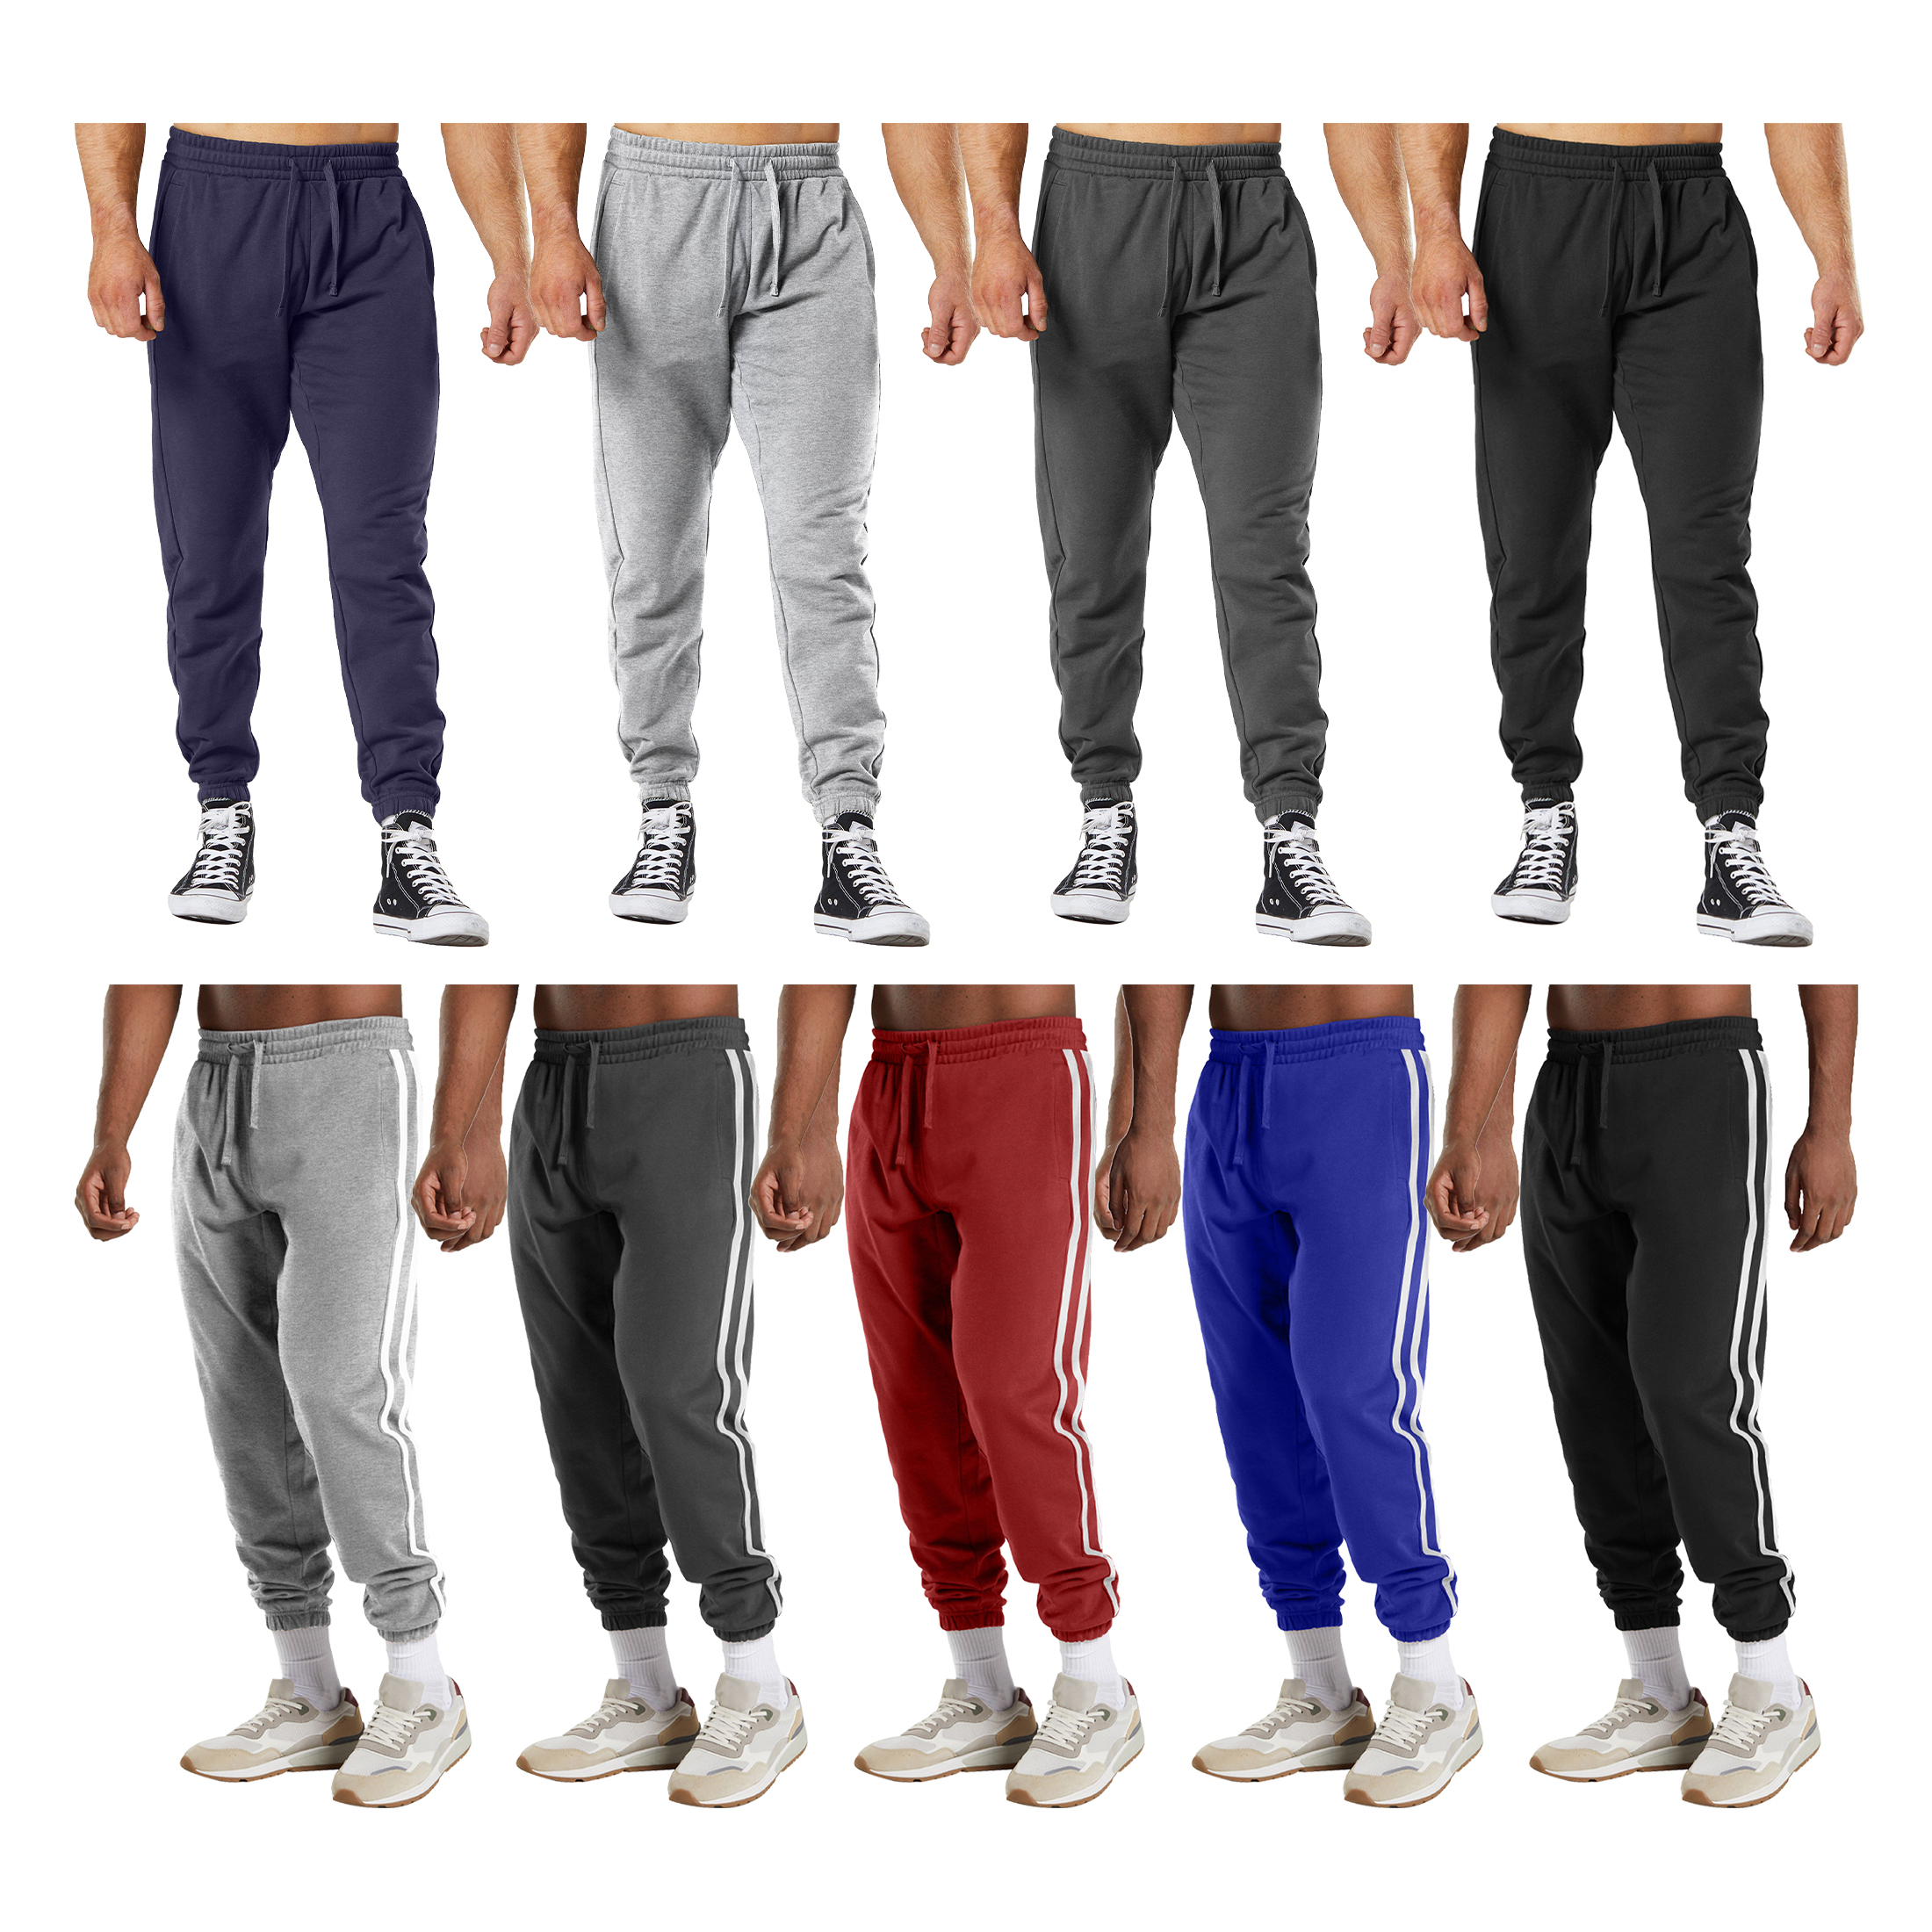 Multi-Pack: Men's Casual Fleece-Lined Elastic Bottom Jogger Pants With Pockets - 2-PACK, XL